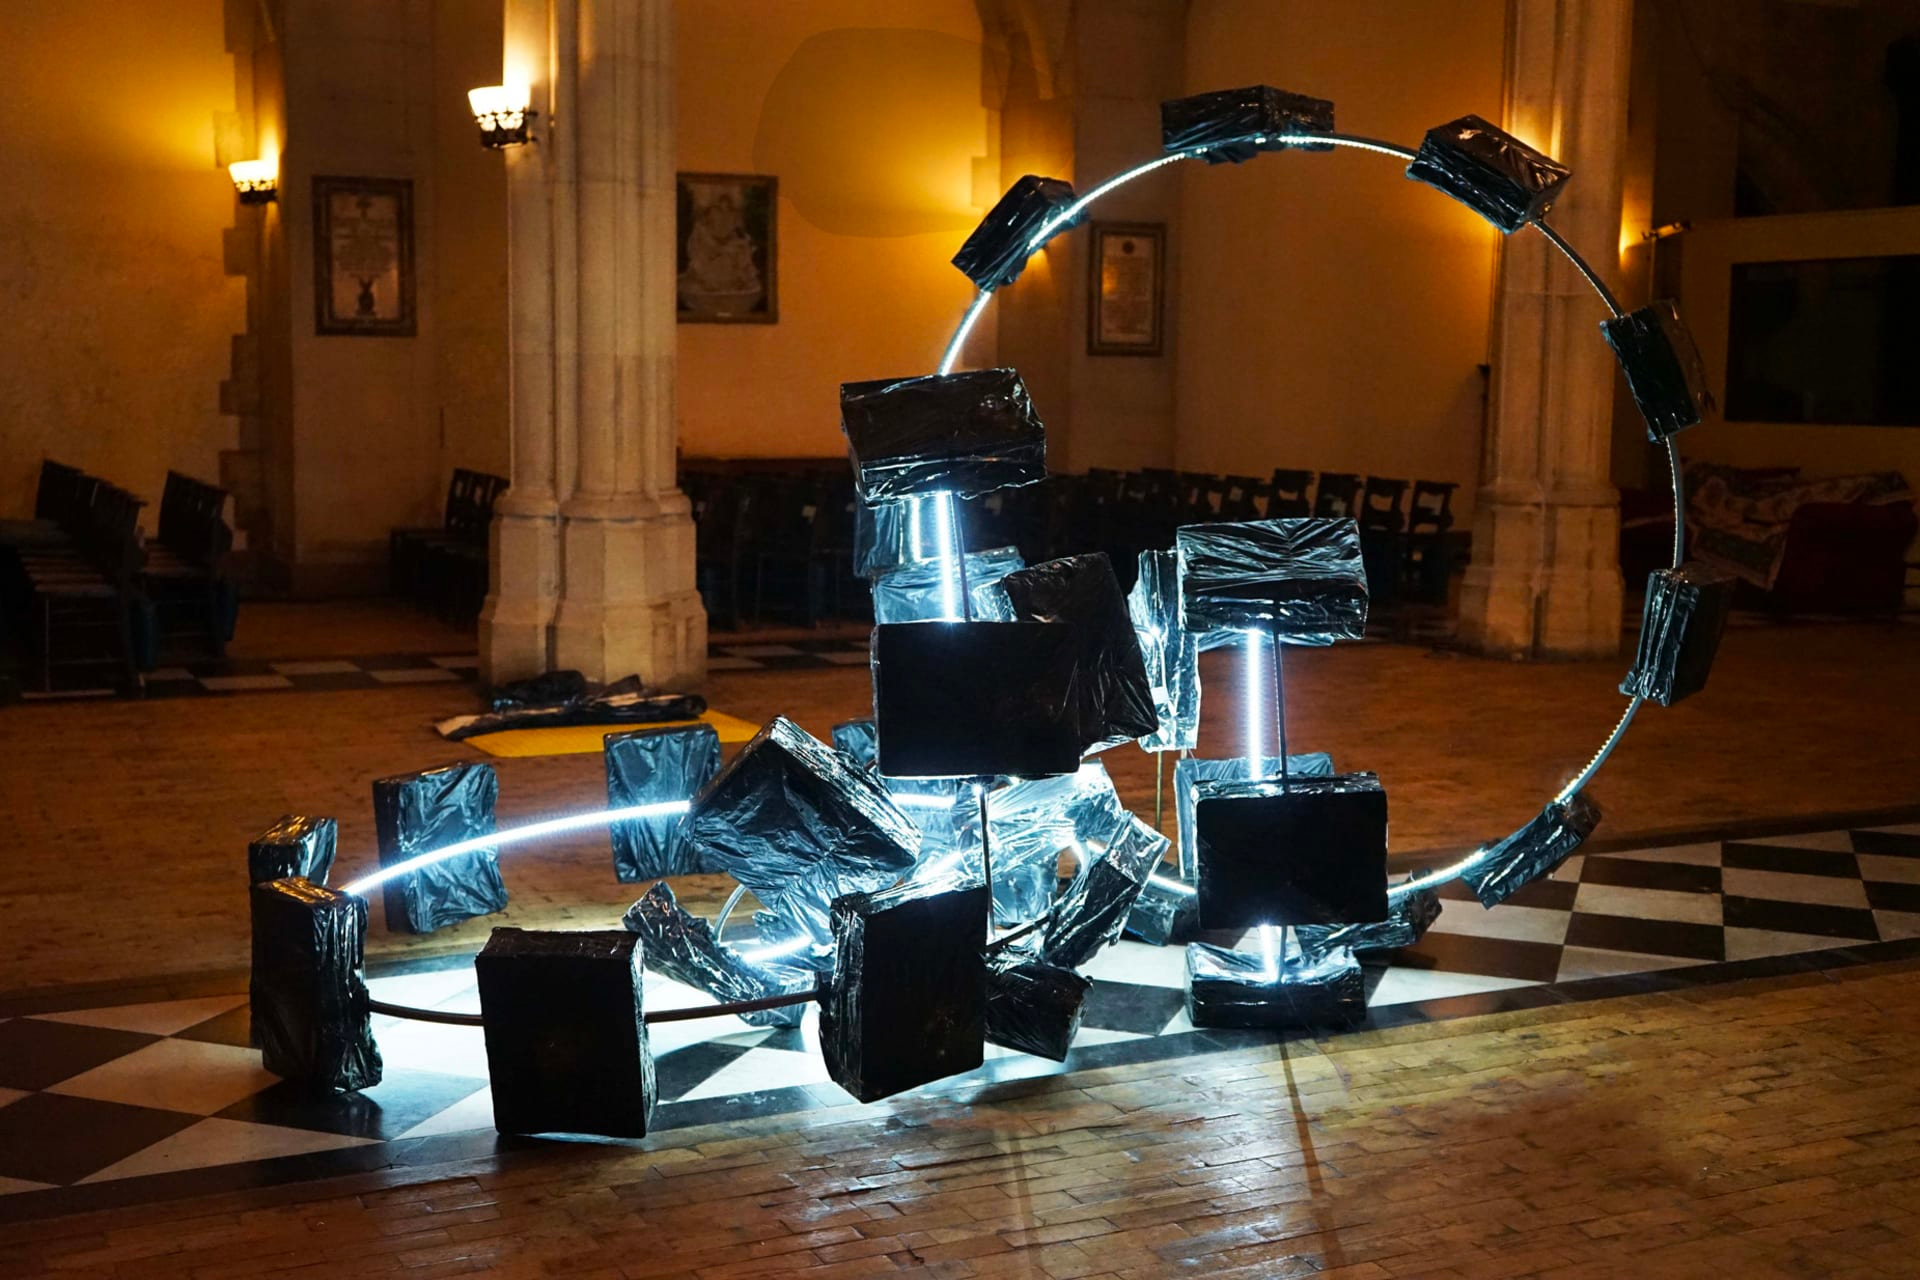 Photograph of a sculpture consisting of several illuminated rings, with black rectangular objects placed around their circumference, in a softly lit room with stone arches and pillars.